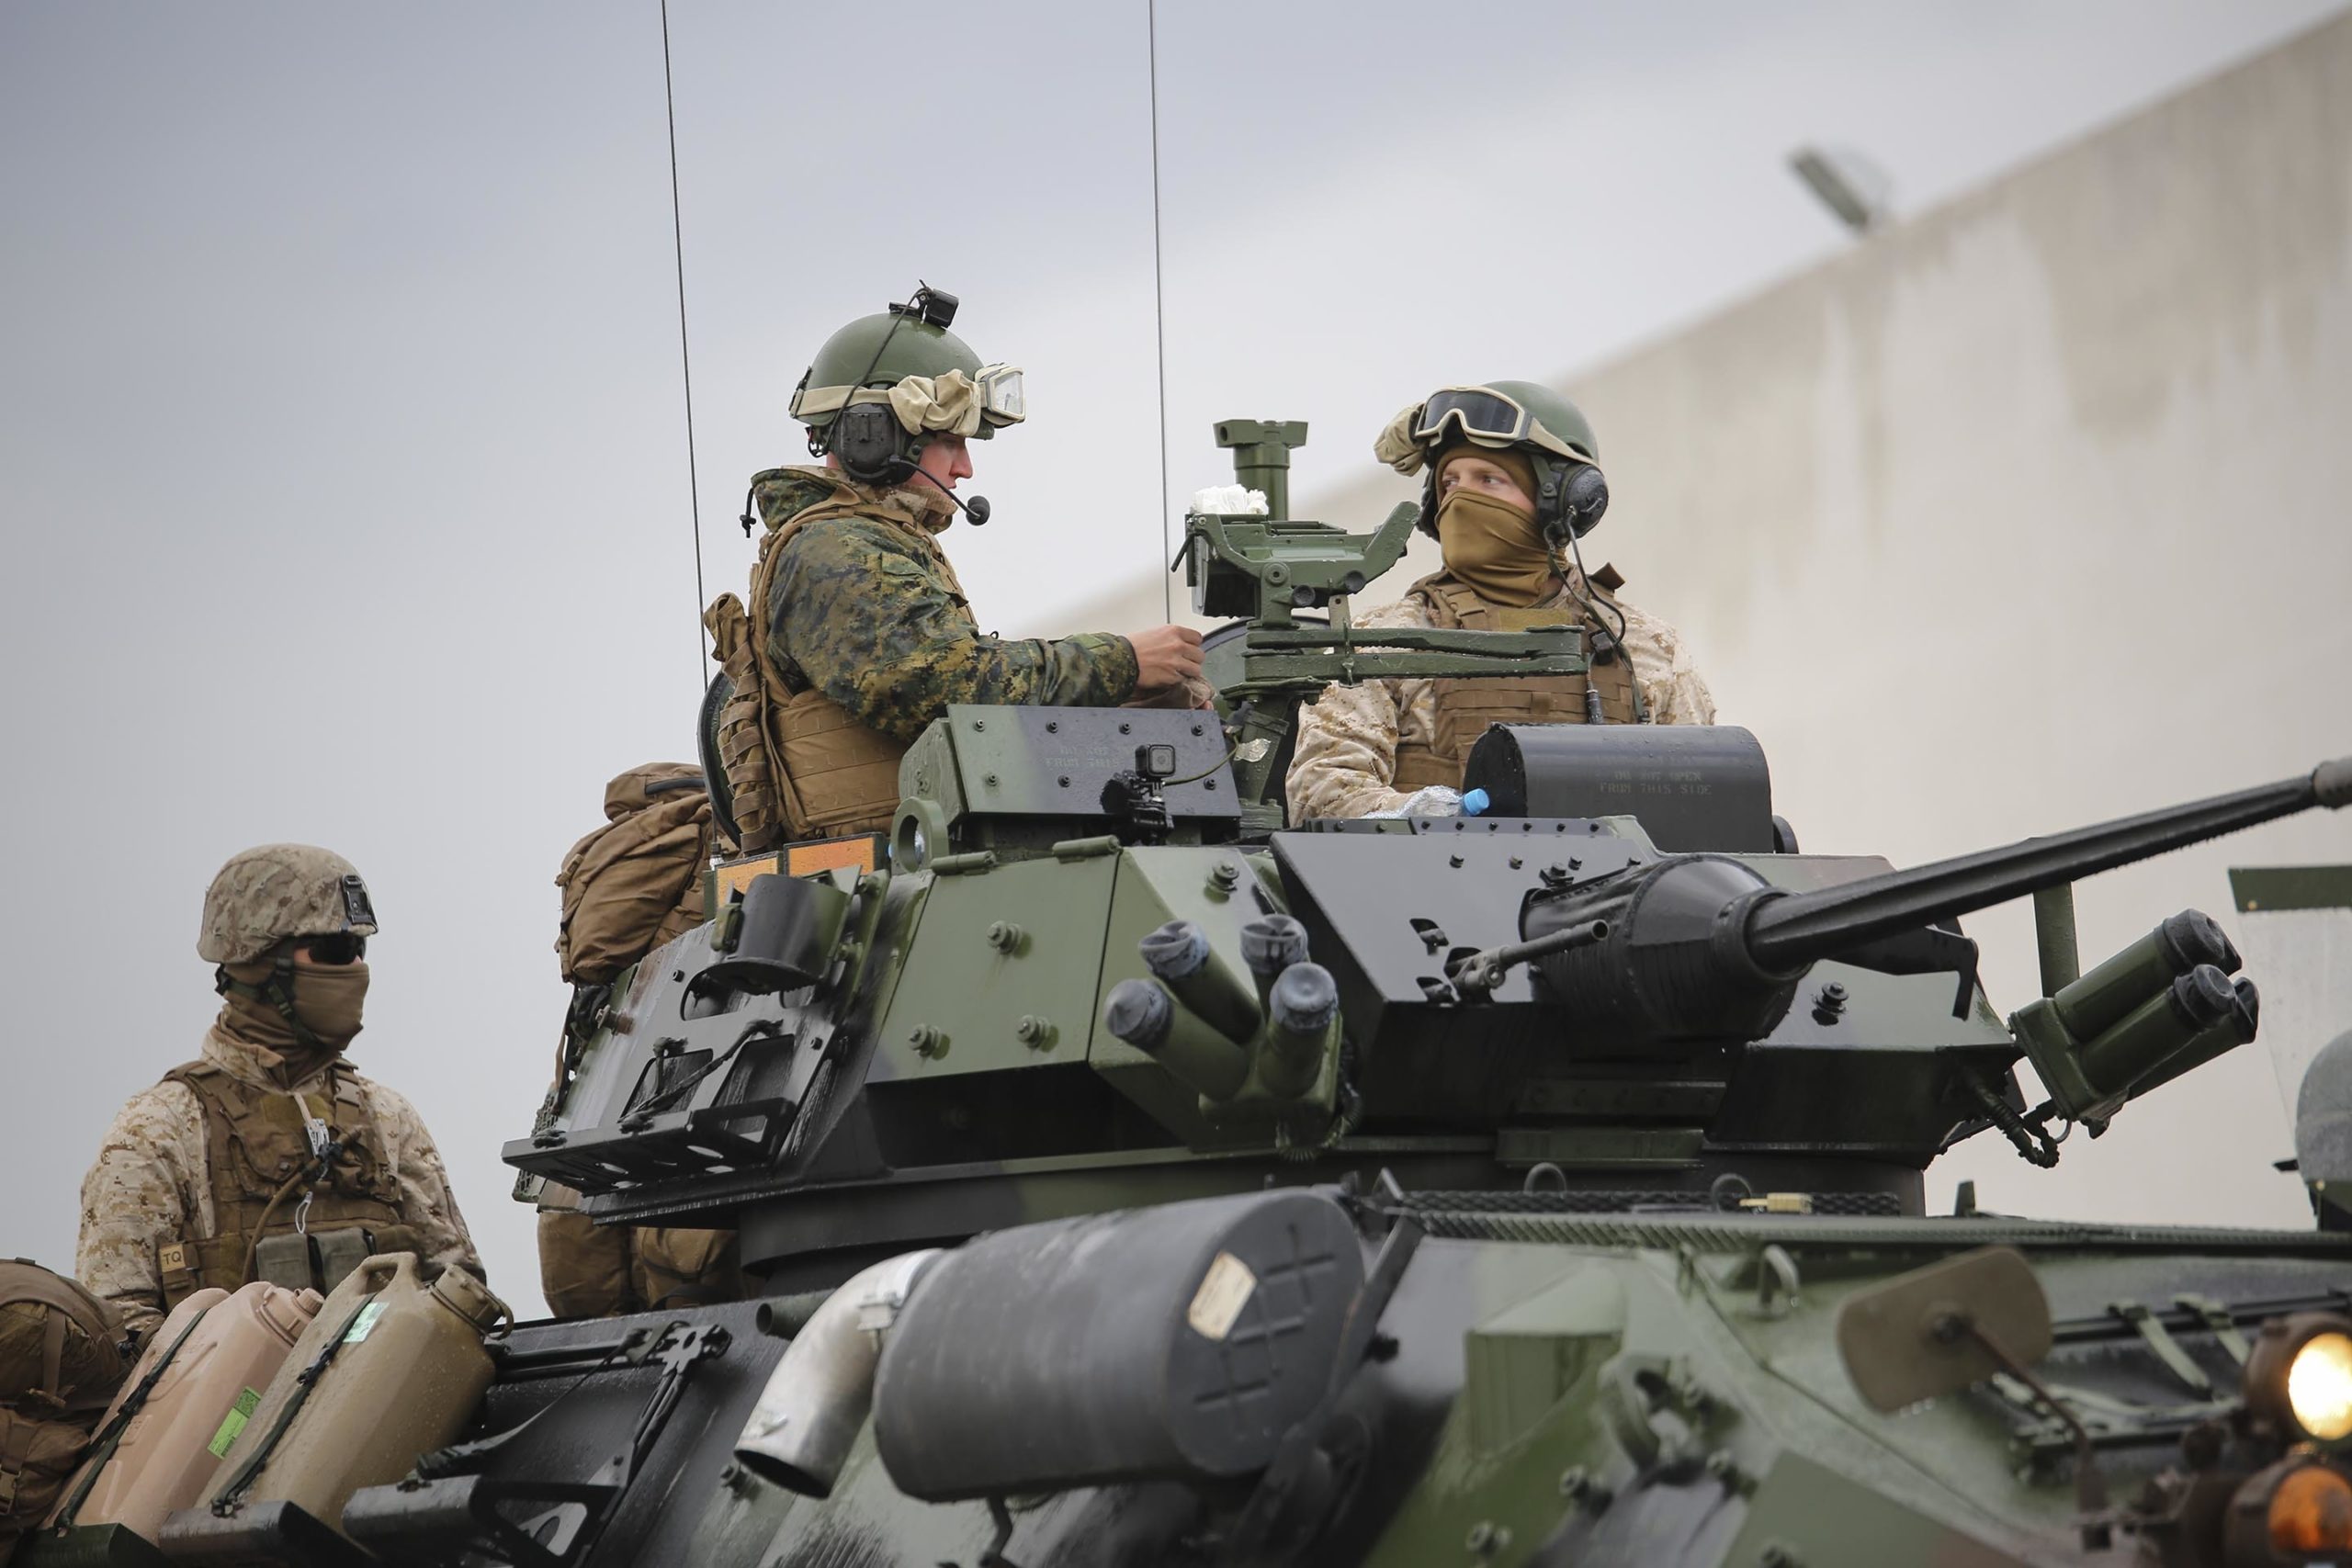 Marines of 4th Light Armored Reconnaissance Battalion, 4th Marine Division, convoy from Rota, Spain to Almeria, Spain on Oct. 26, 2015. The Marines traveled to their training site for Trident Juncture 2015 to participate in live-fire ranges and conduct field operations with NATO allied forces.